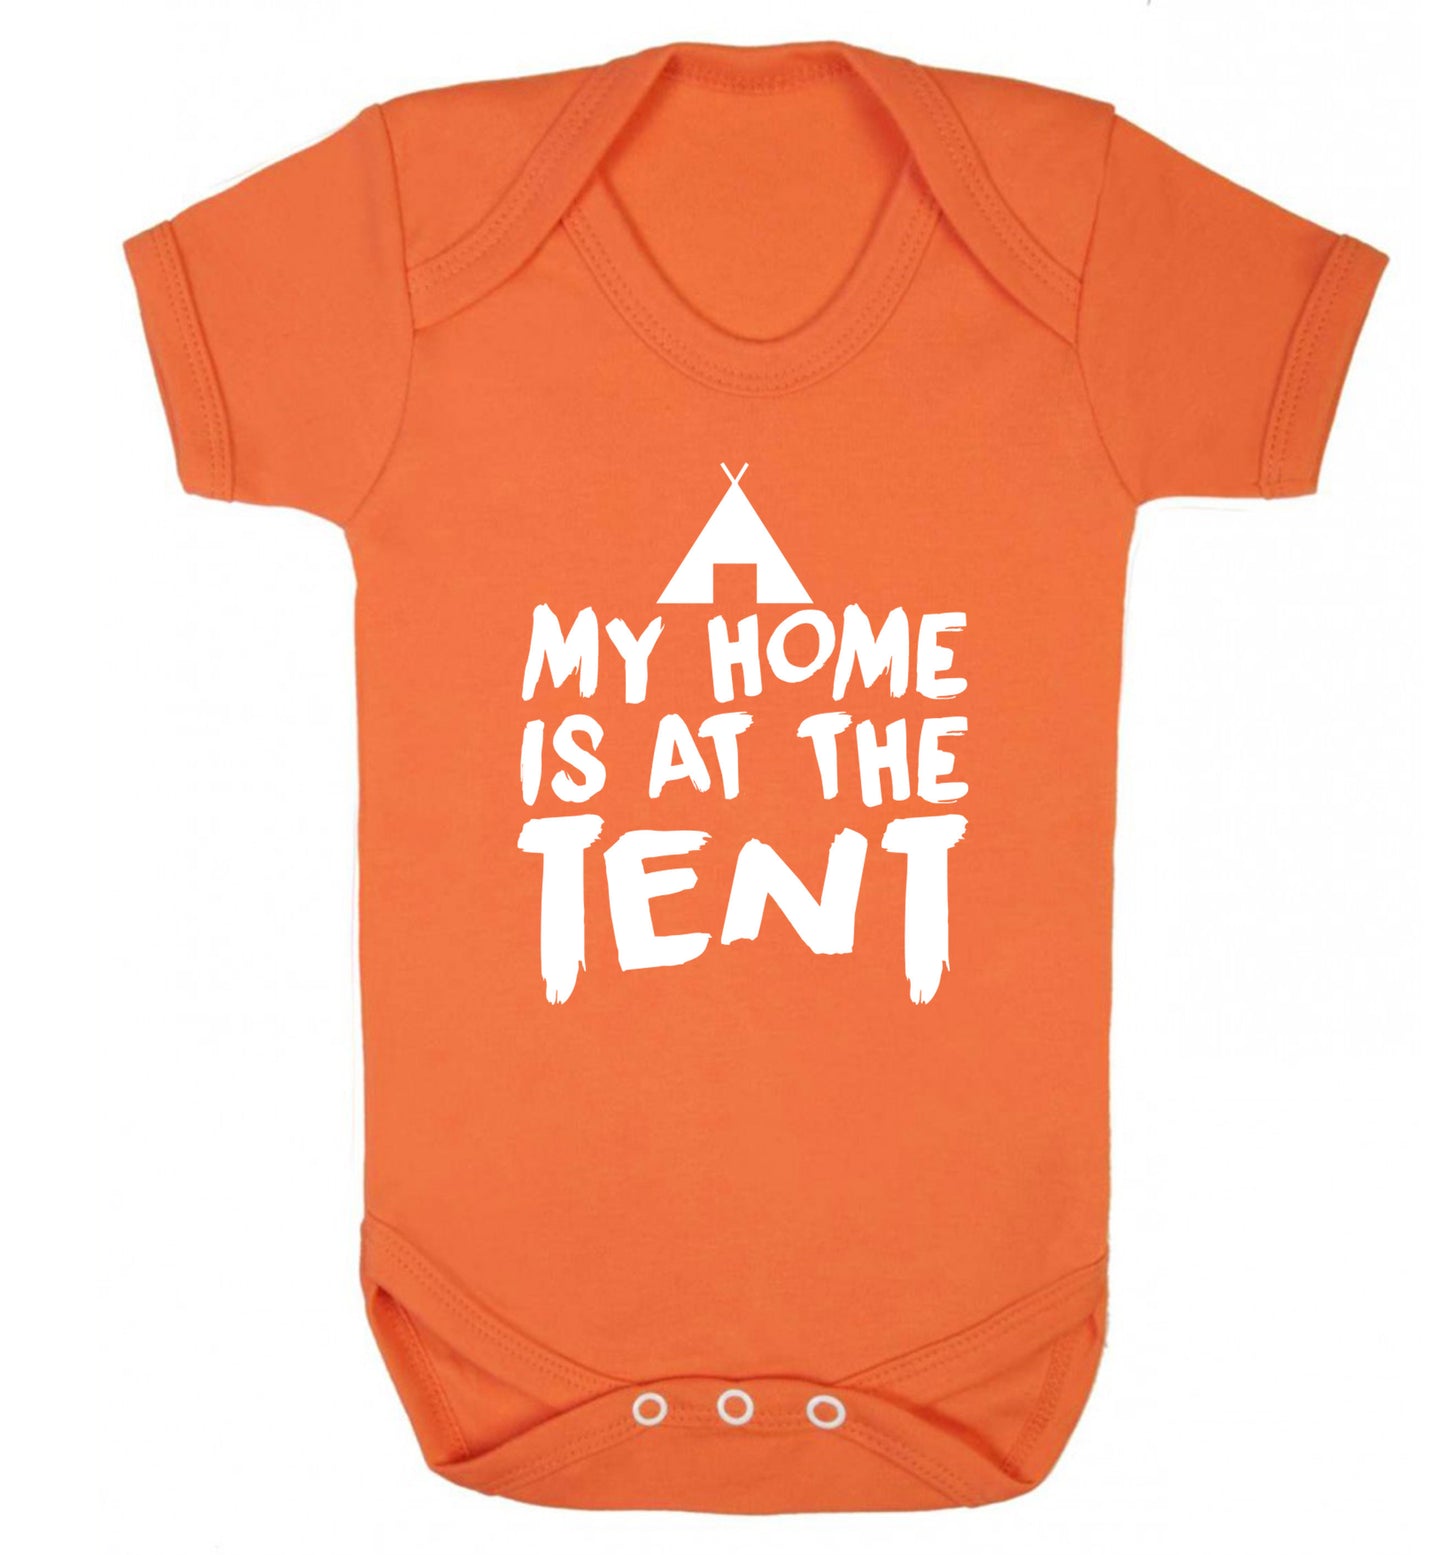 My home is at the tent Baby Vest orange 18-24 months